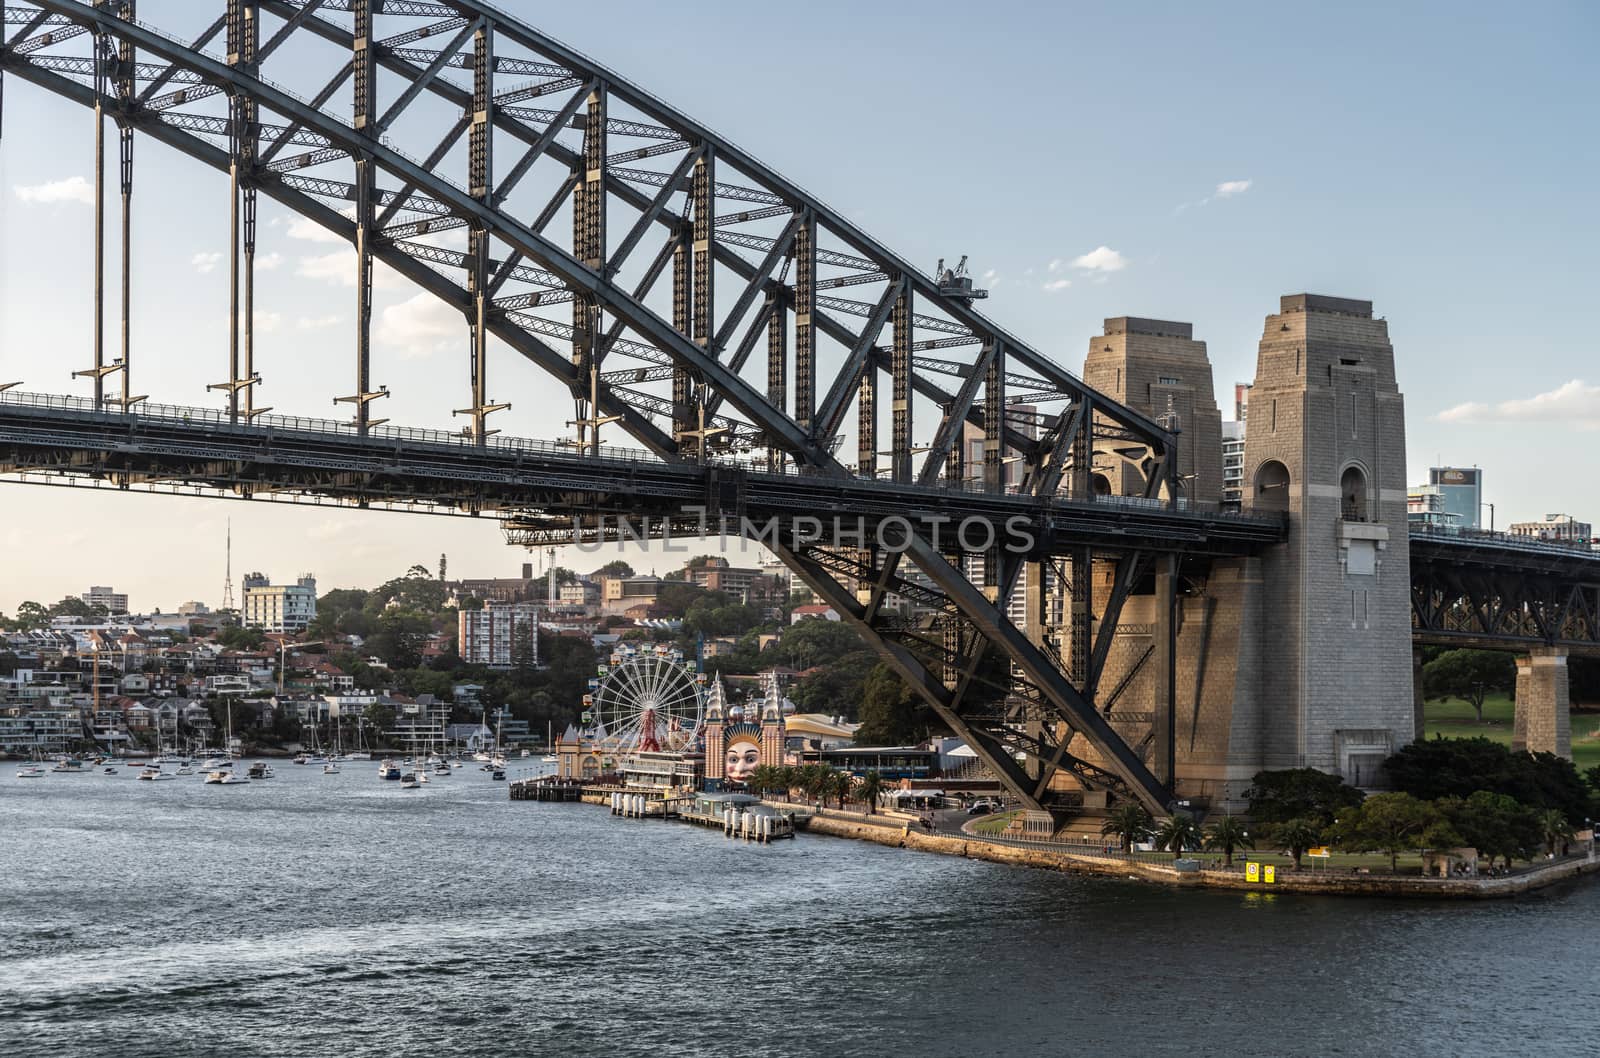 Sydney, Australia - February 12, 2019: Harbour bridge north side landing during sunset. Horizon is north shore of bay with Kirribilli neighborhood and Luna Park. Boats on water.